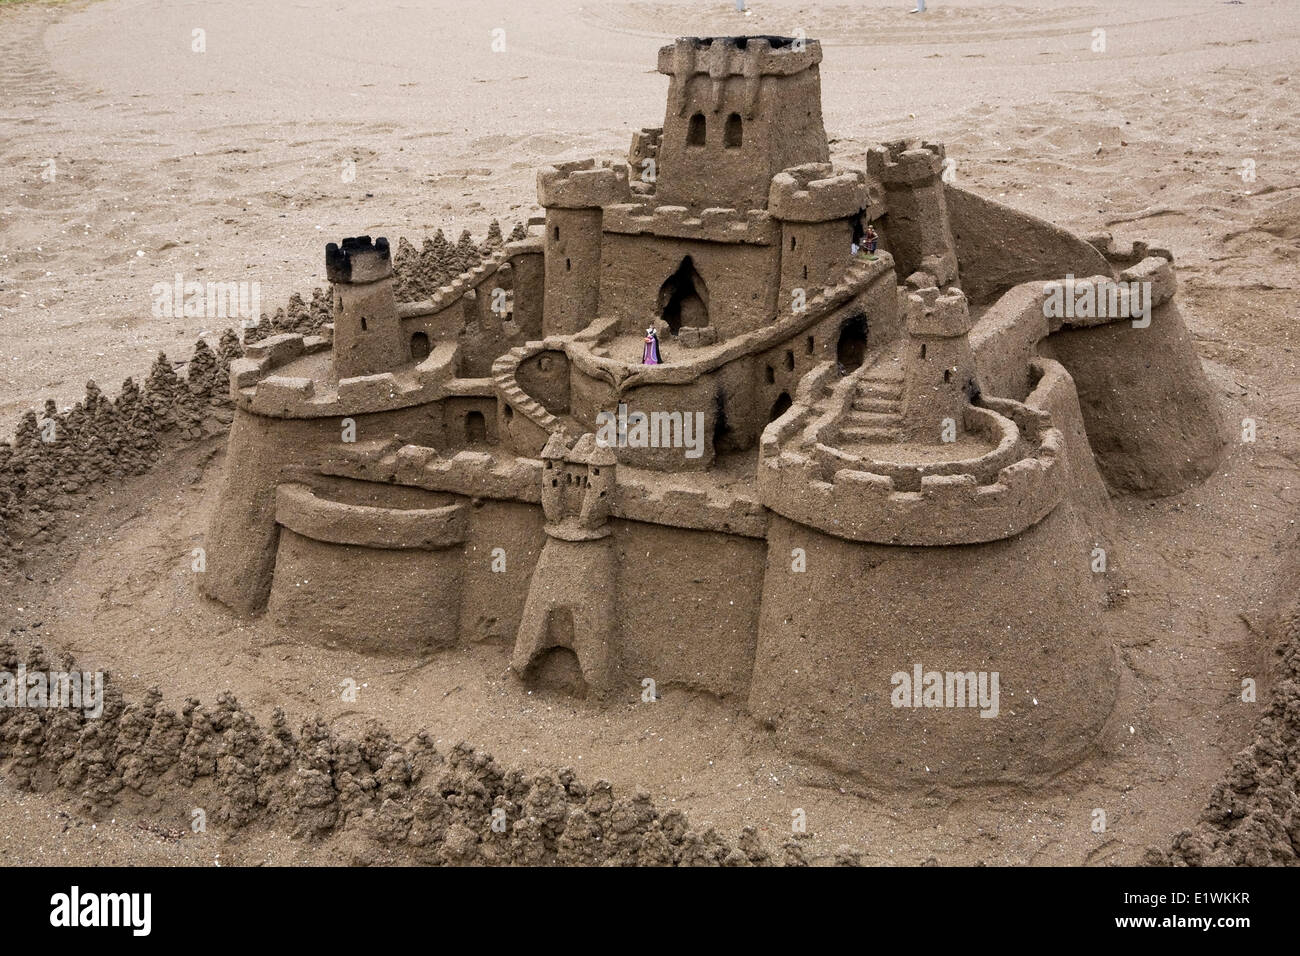 Close-up of a medieval shaped sandcastle, Torremolinos, Costal del Sol, Spain, Europe Stock Photo